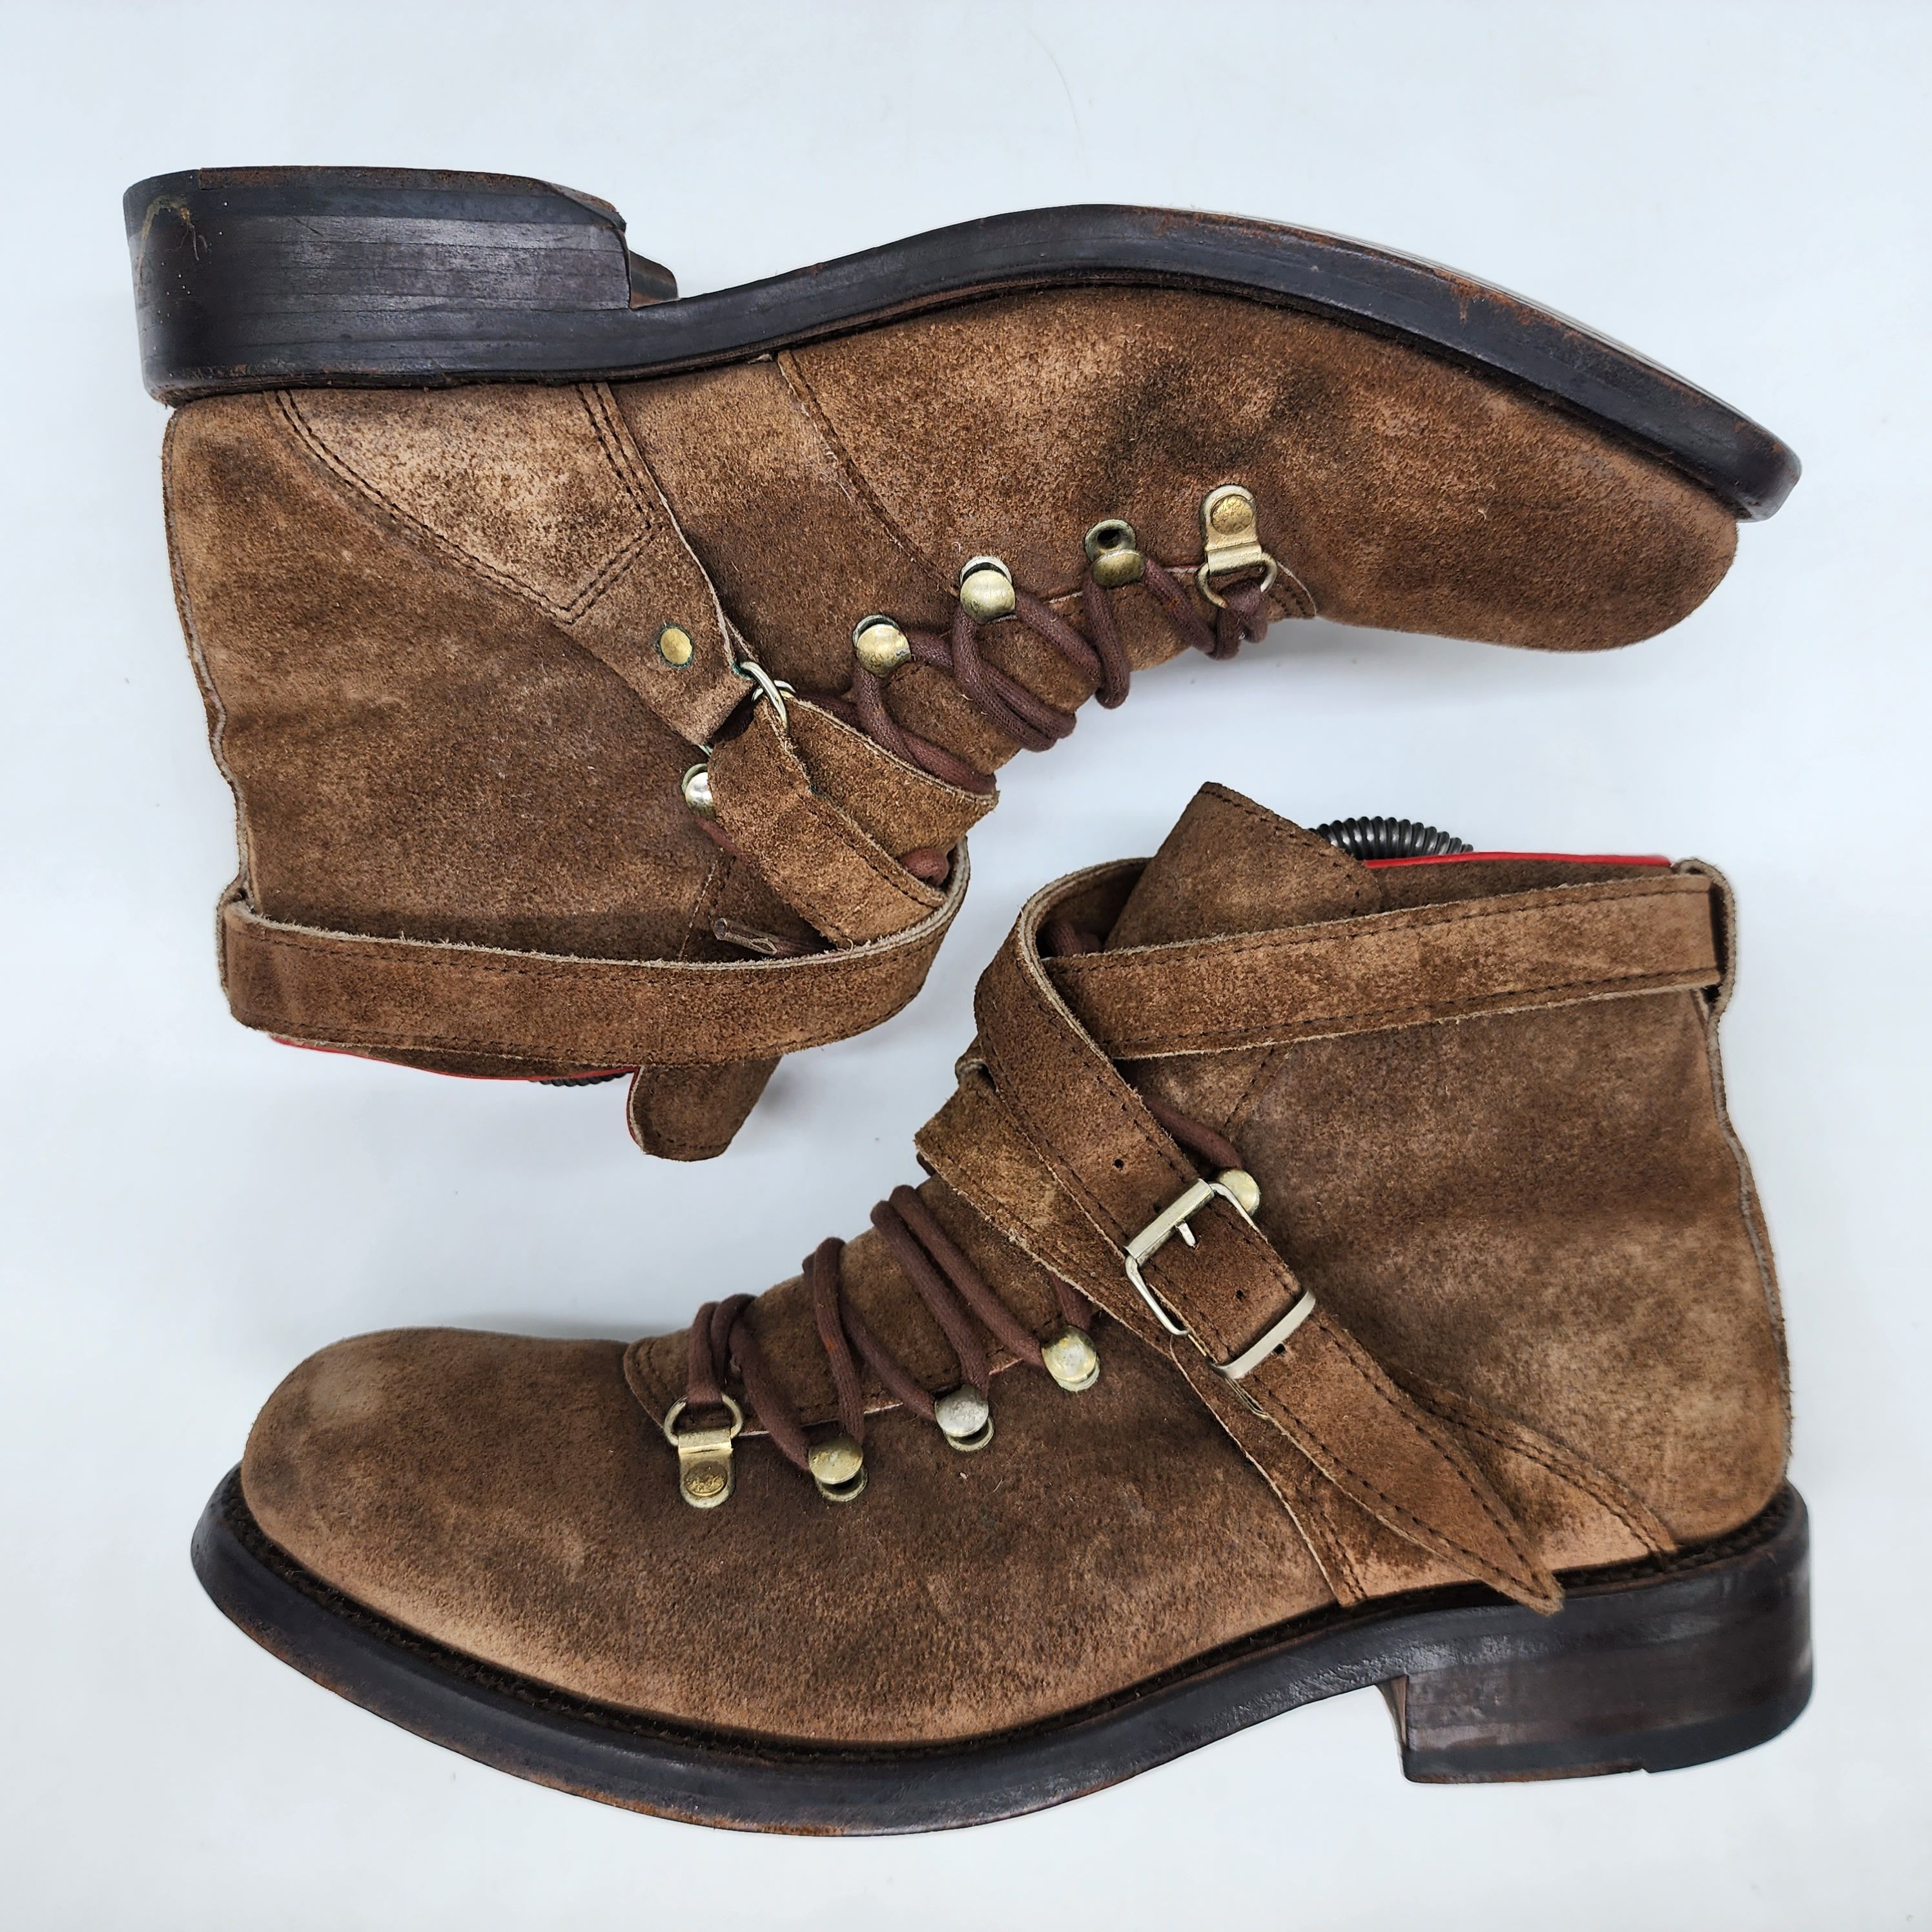 Archival Clothing - Jean Baptiste Rautureau - Archival Strap Hiking Boot - 5